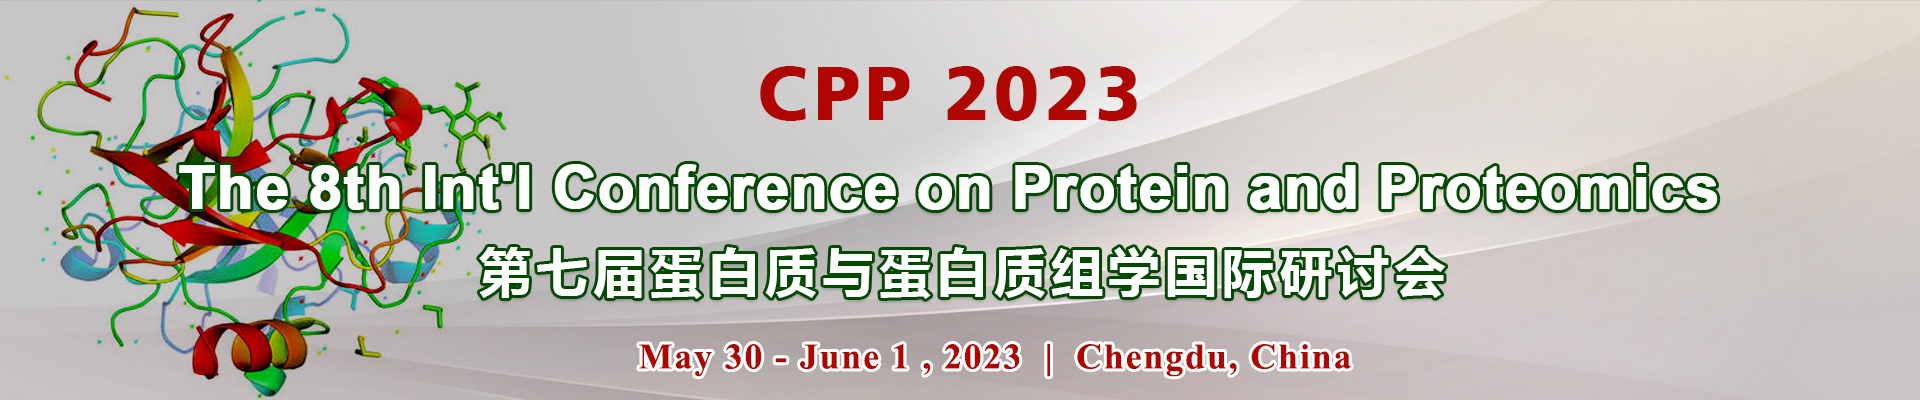 The 8th Int'l Conference on Protein and Proteomics (CPP 2023)